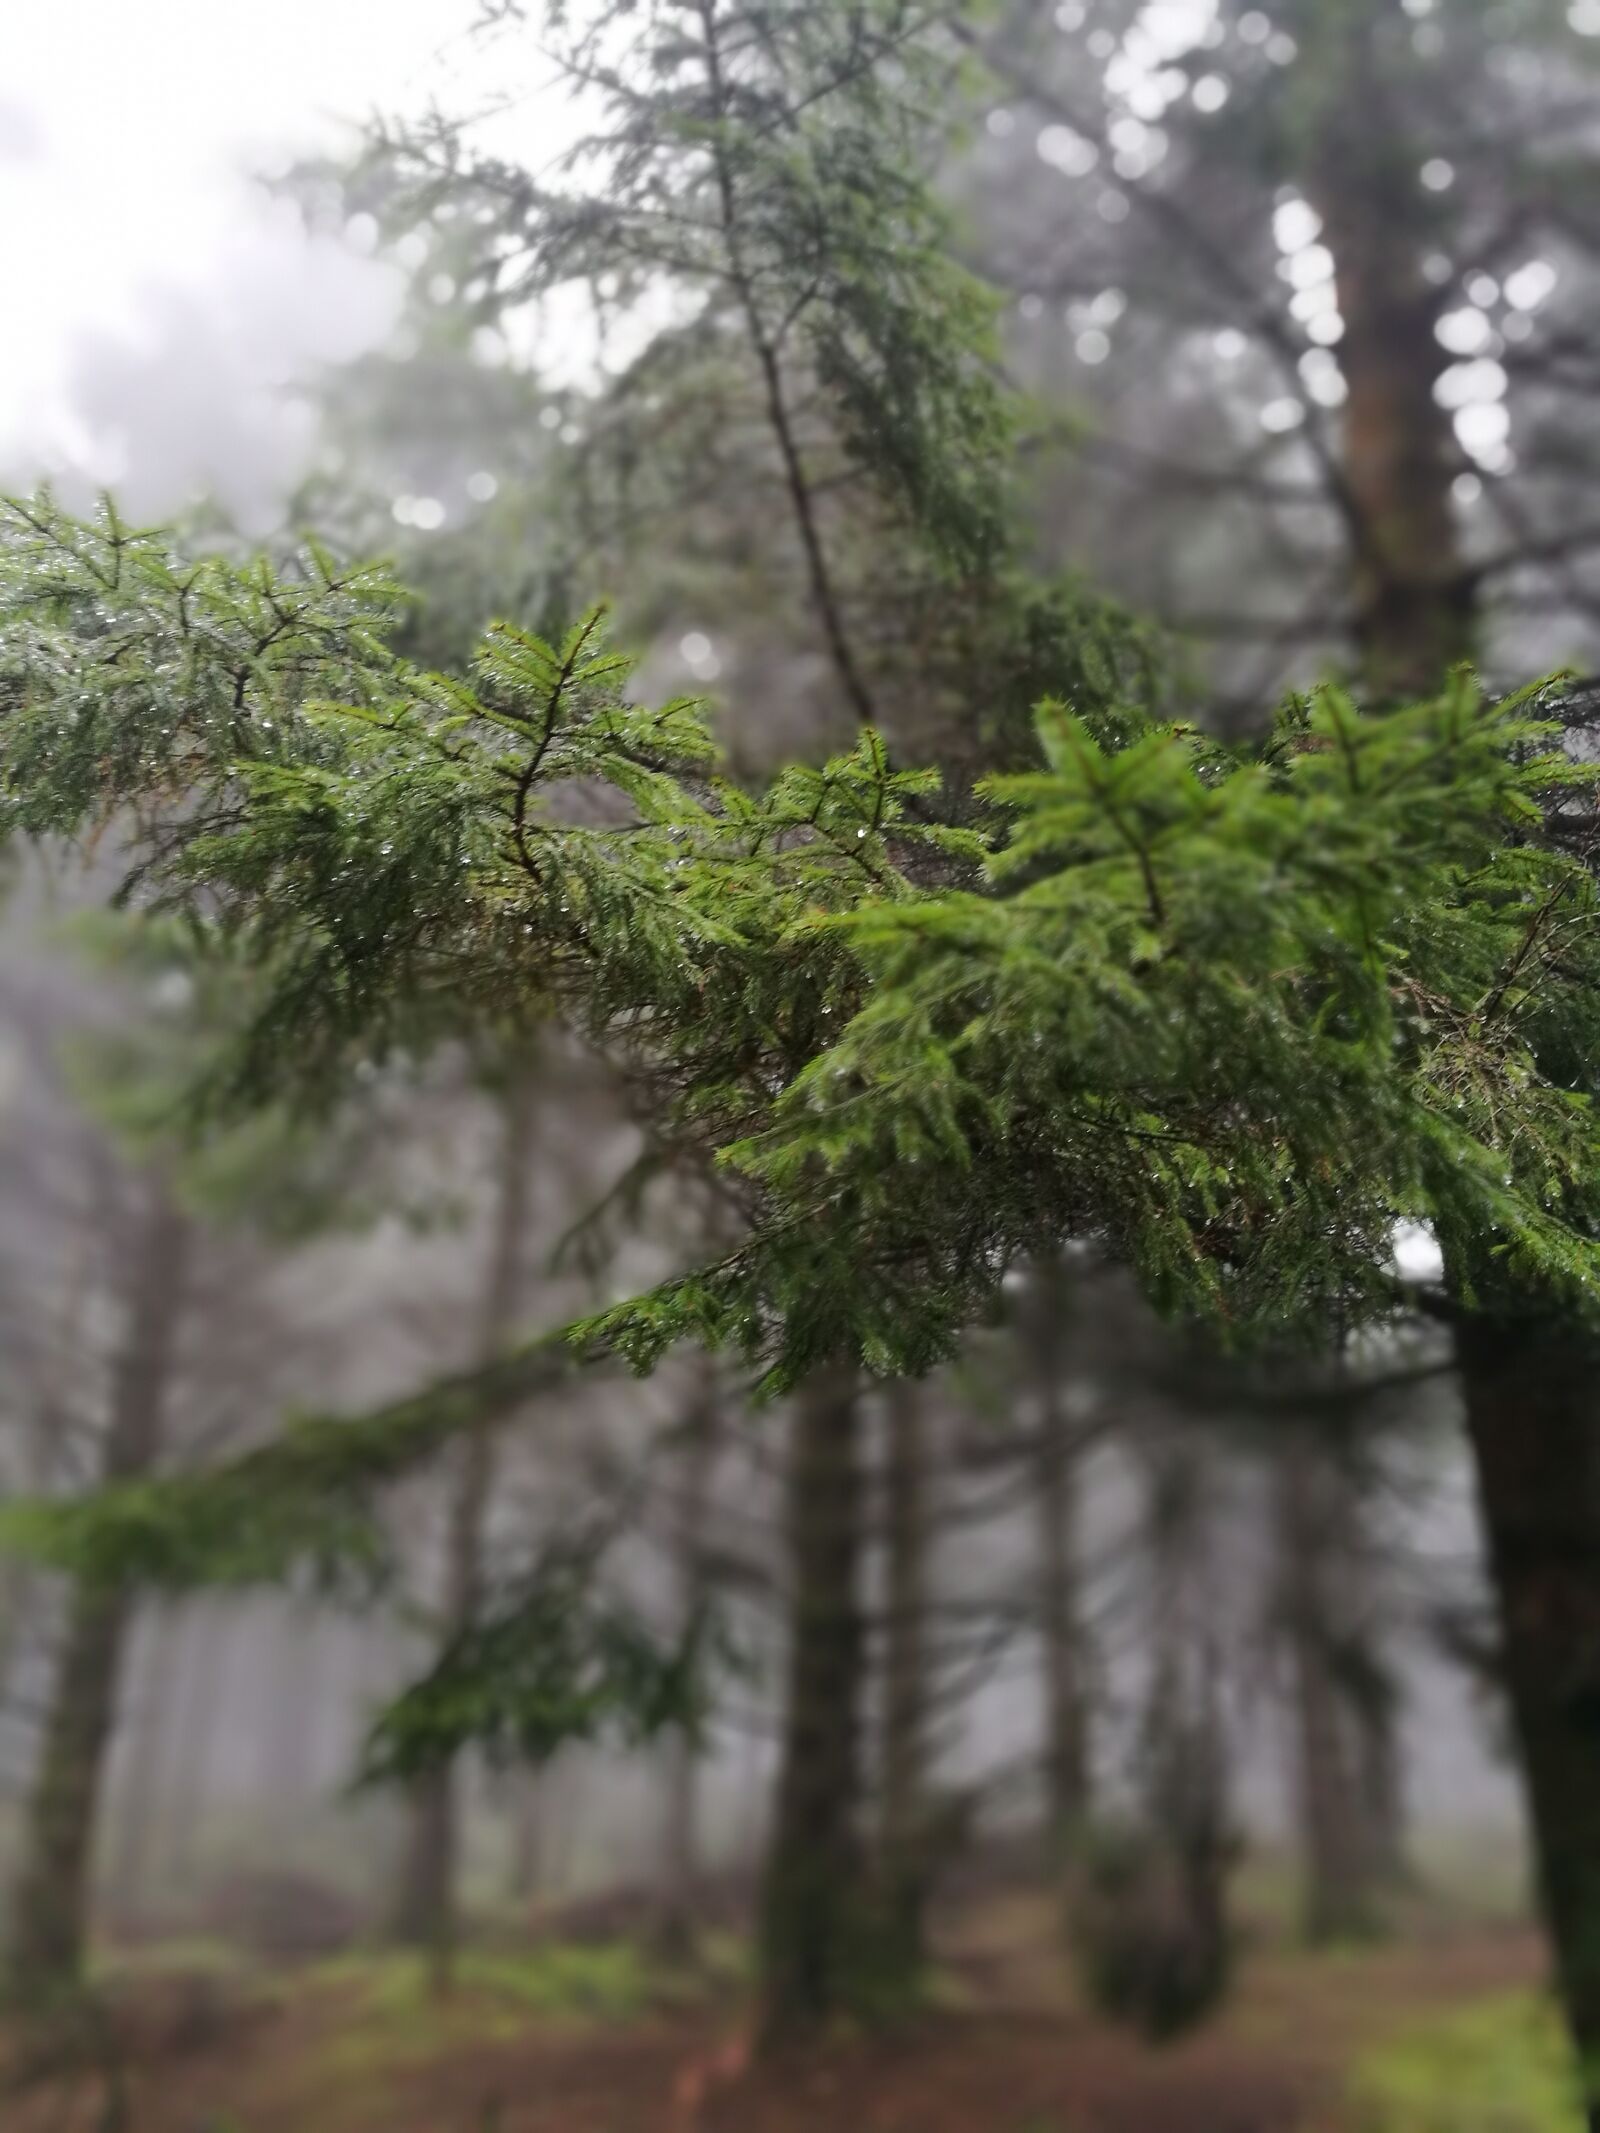 HUAWEI P9 sample photo. Branches, misty, trees, woodland photography